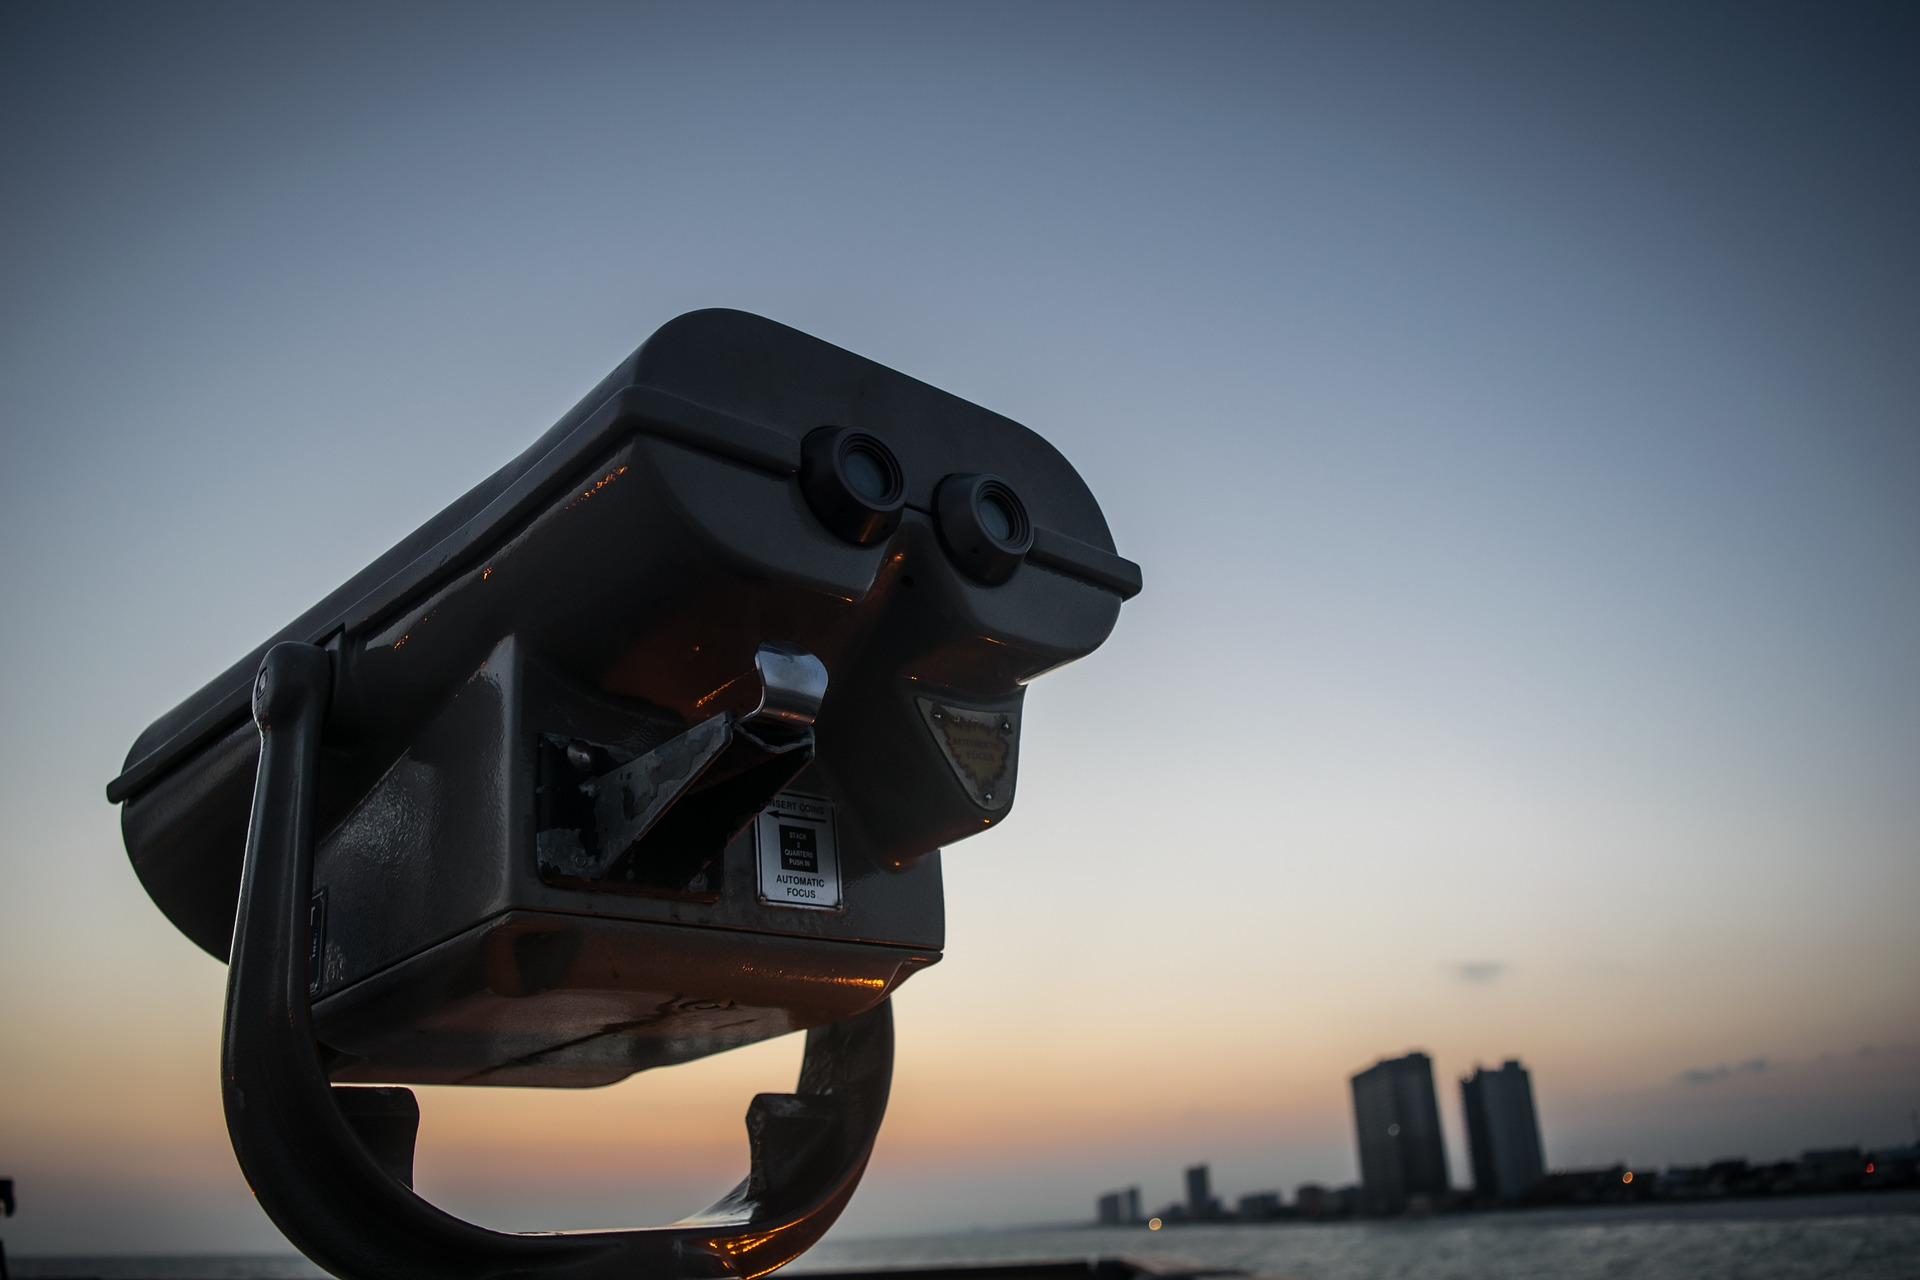 Binoculars overlooking water and a cityscape.